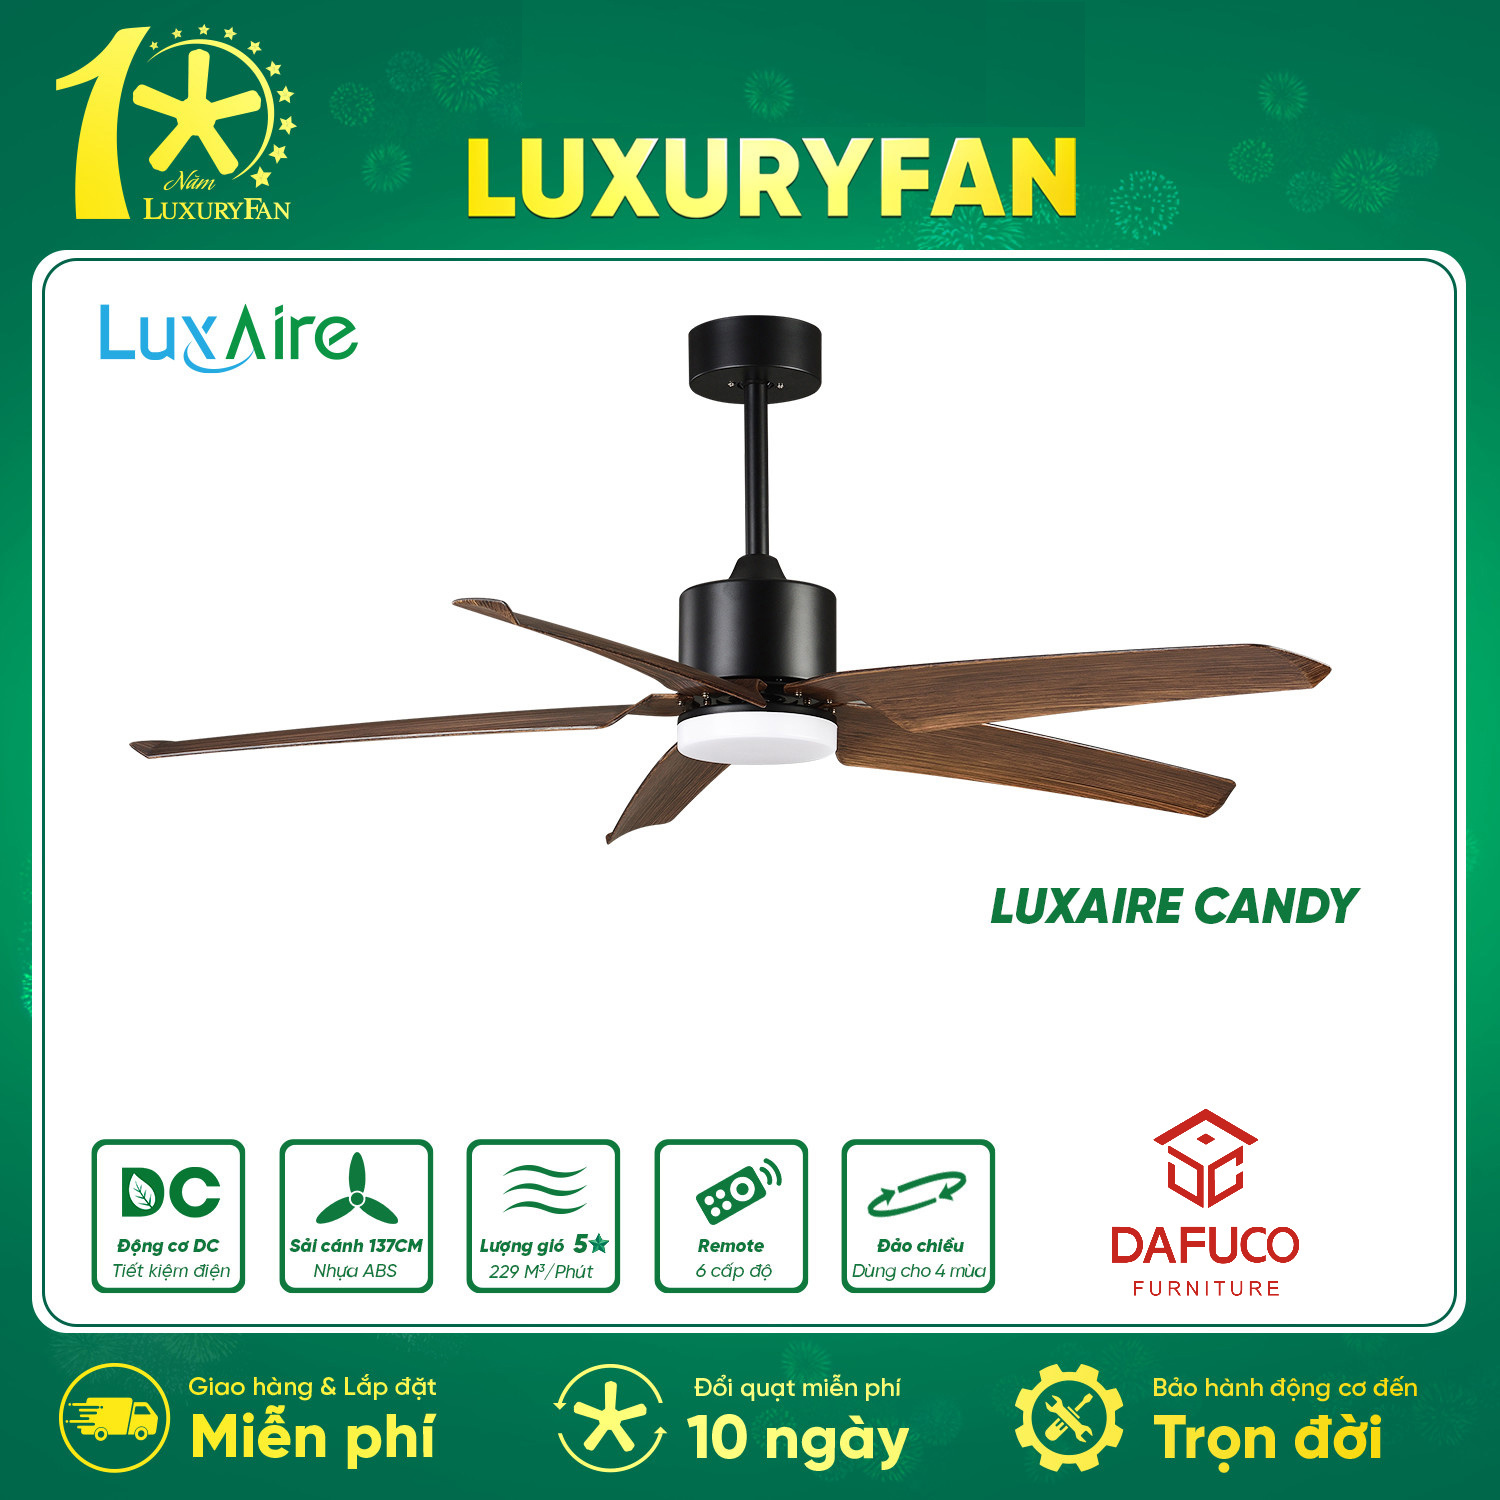 LUXAIRE CANDY